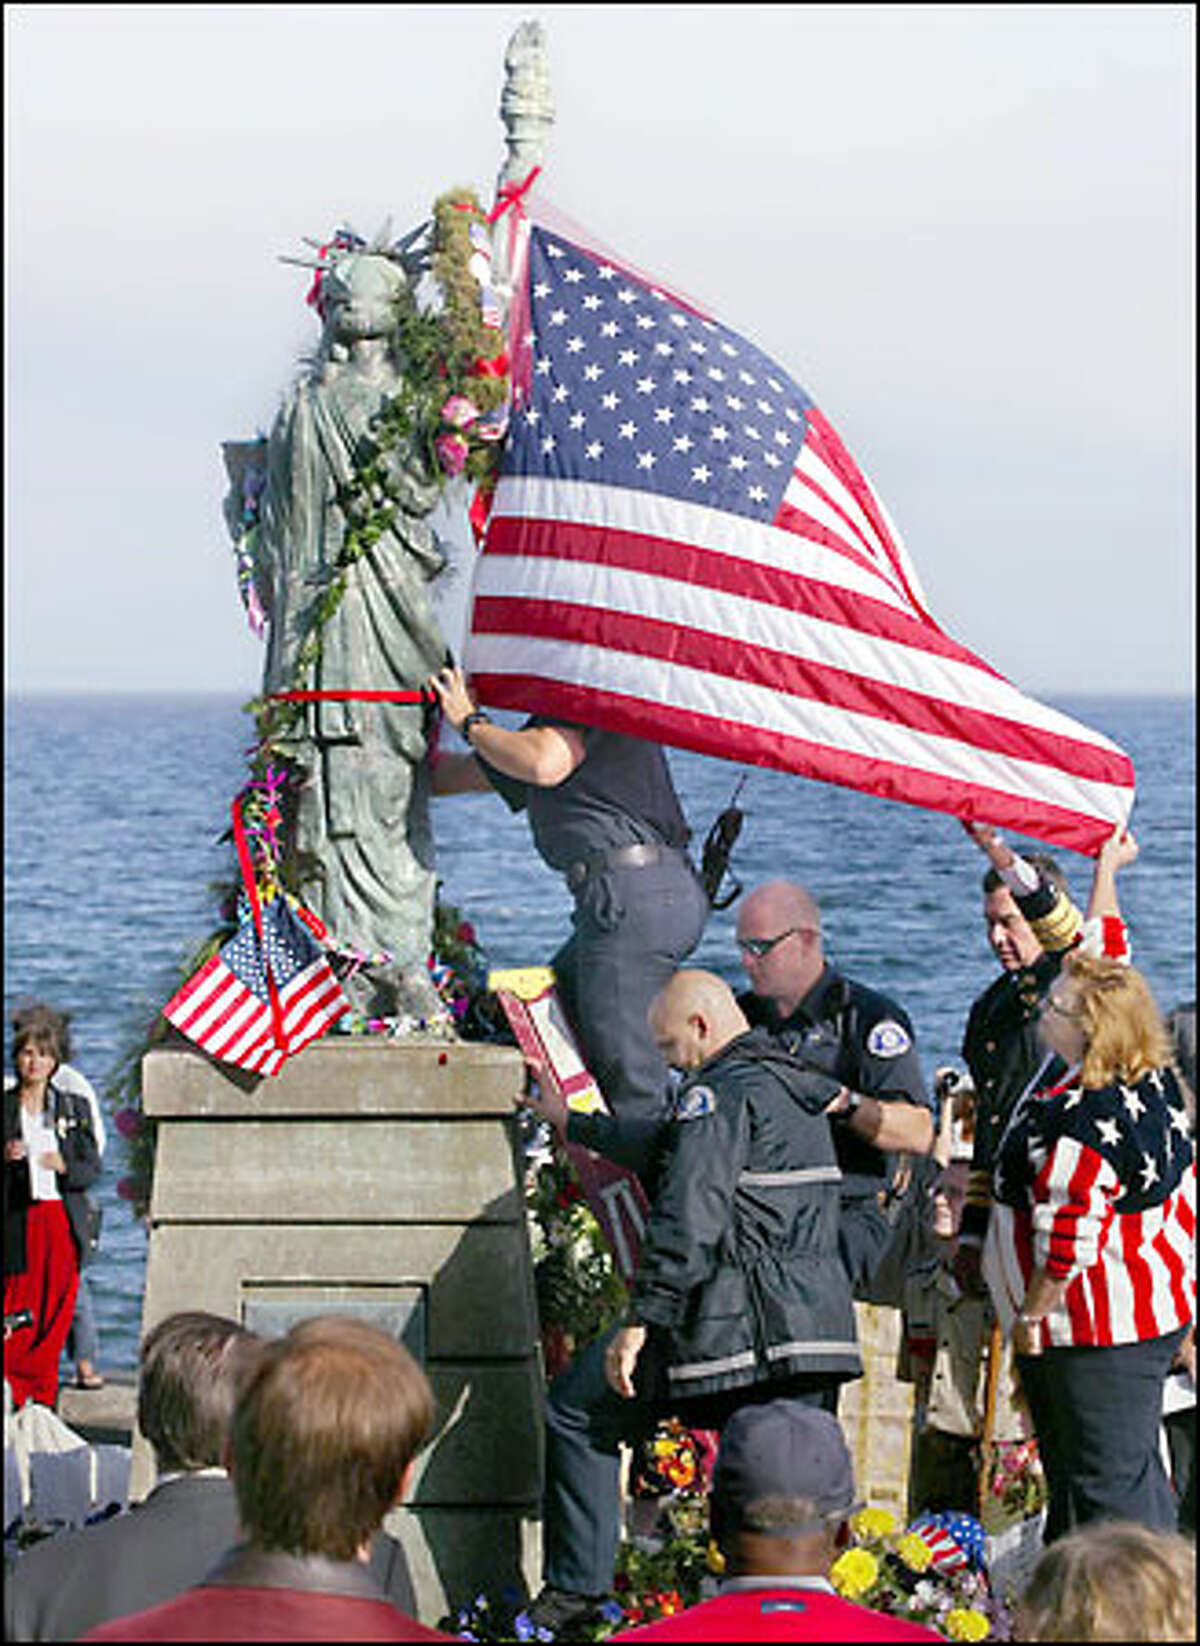 Cindi Laws, bottom right, returned to Alki, where she sought solace last Sept. 11, to place an American flag on the Statue of Liberty. Assisting were Seattle police Chief Gil Kerlikowske, behind her, Seattle firefighters Jason De Bruler, top, Roland Falb, in glasses, and L.T. Grant.